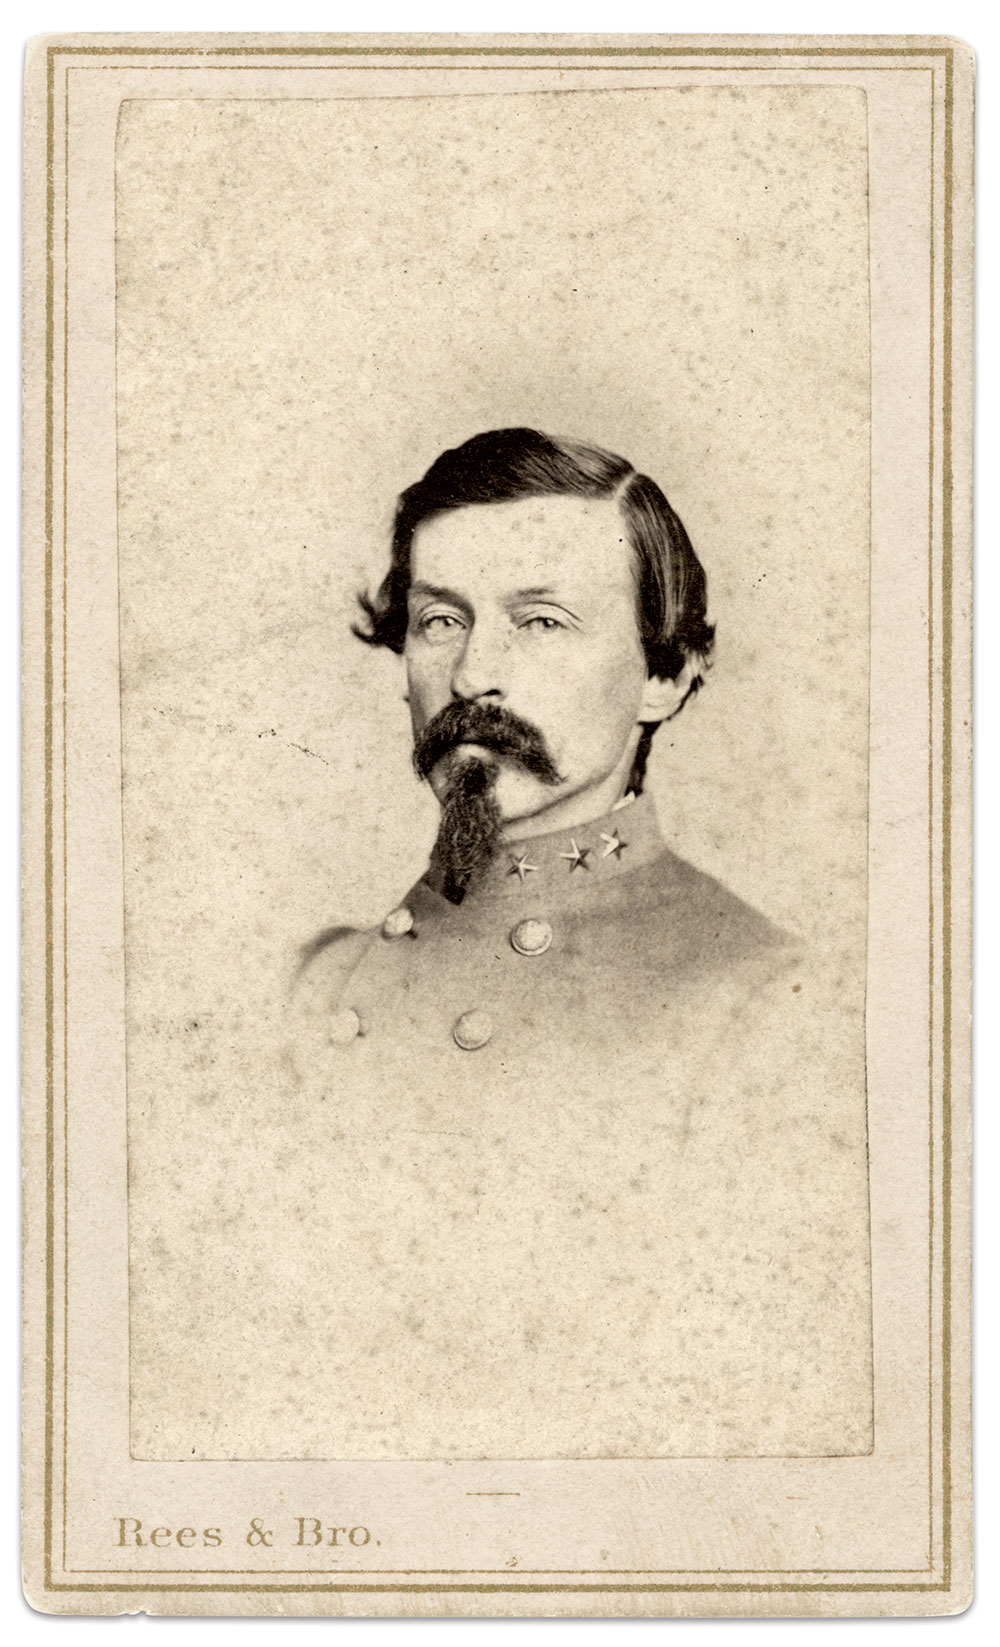 Carte de visite by Charles R. Rees & Brother of Richmond, Va.